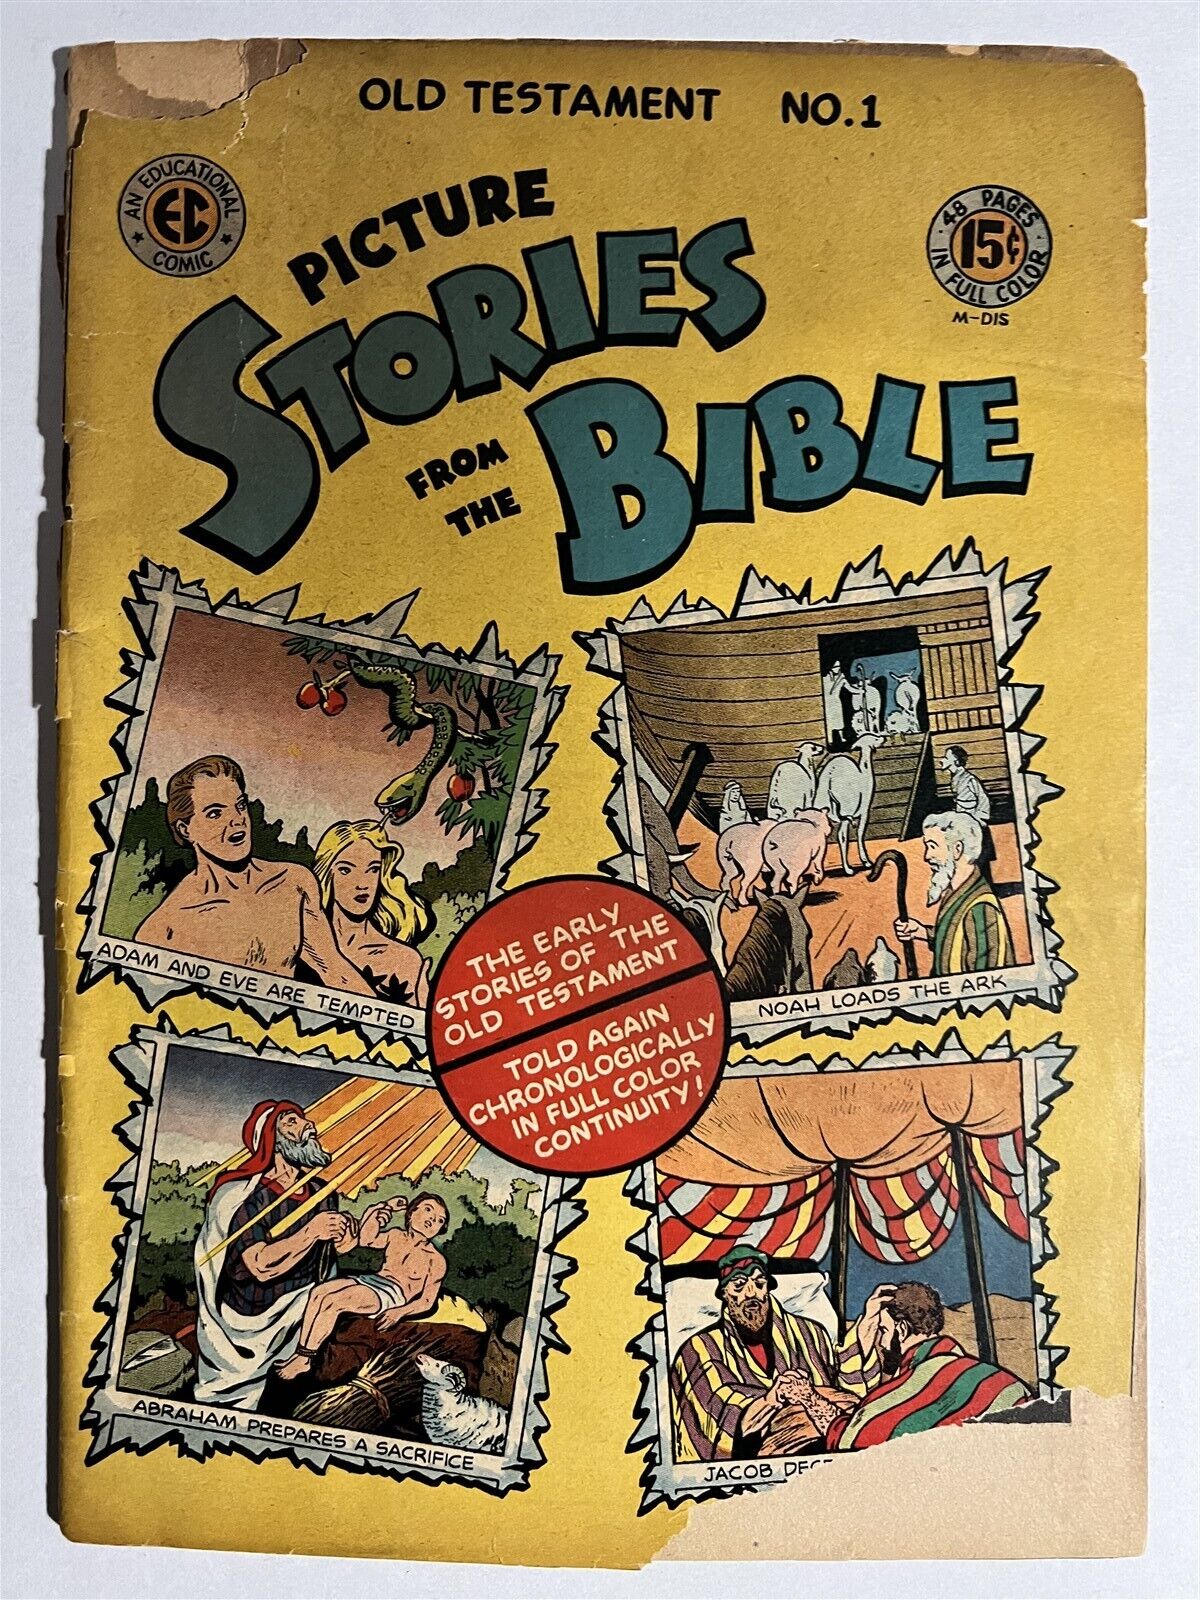 PICTURE STORIES FROM THE BIBLE #1 EC COMICS GOLDEN AGE LOW GRADE PRE CODE